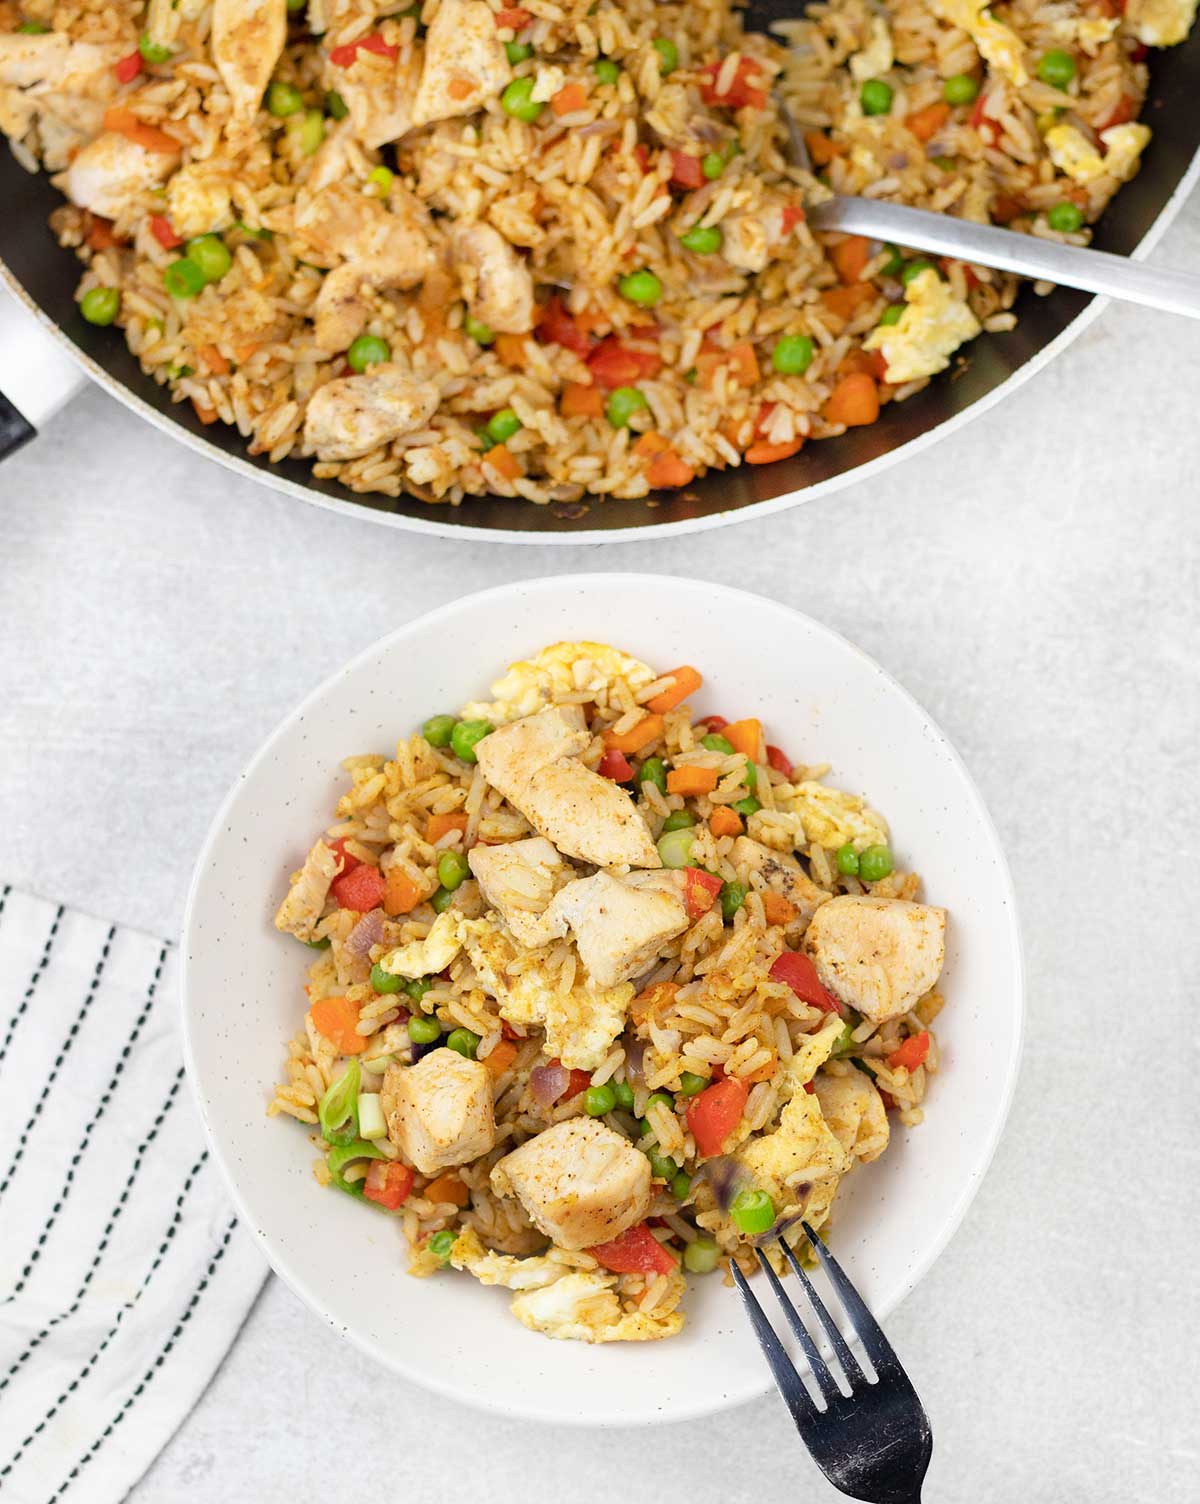 Curry fried rice with chicken and vegetables.